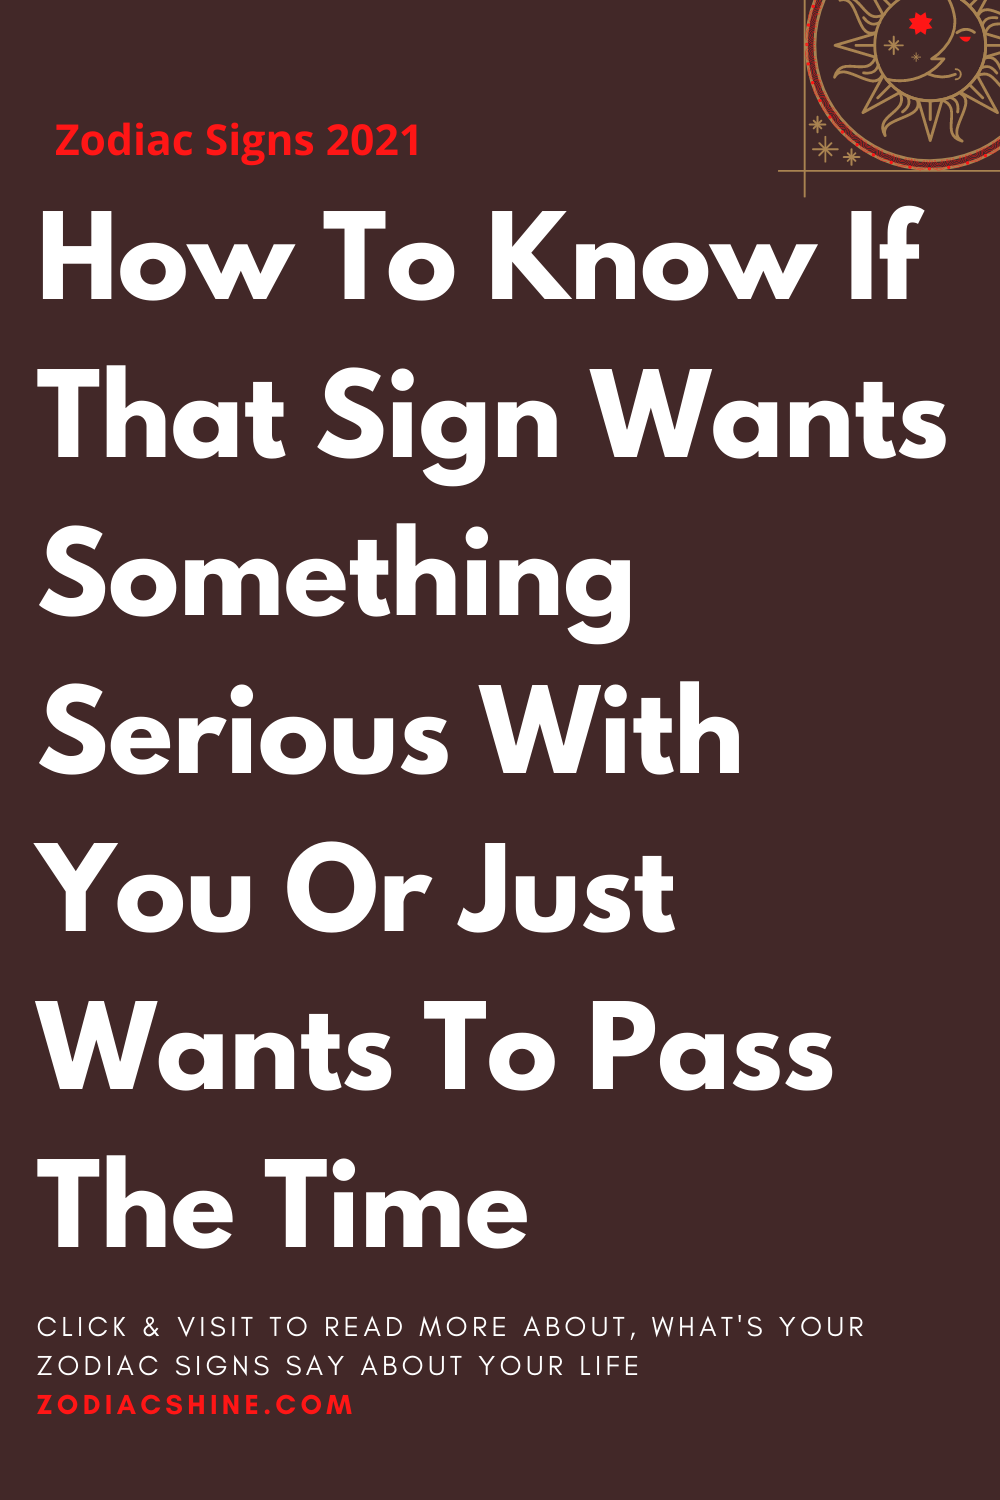 How To Know If That Sign Wants Something Serious With You Or Just Wants To Pass The Time